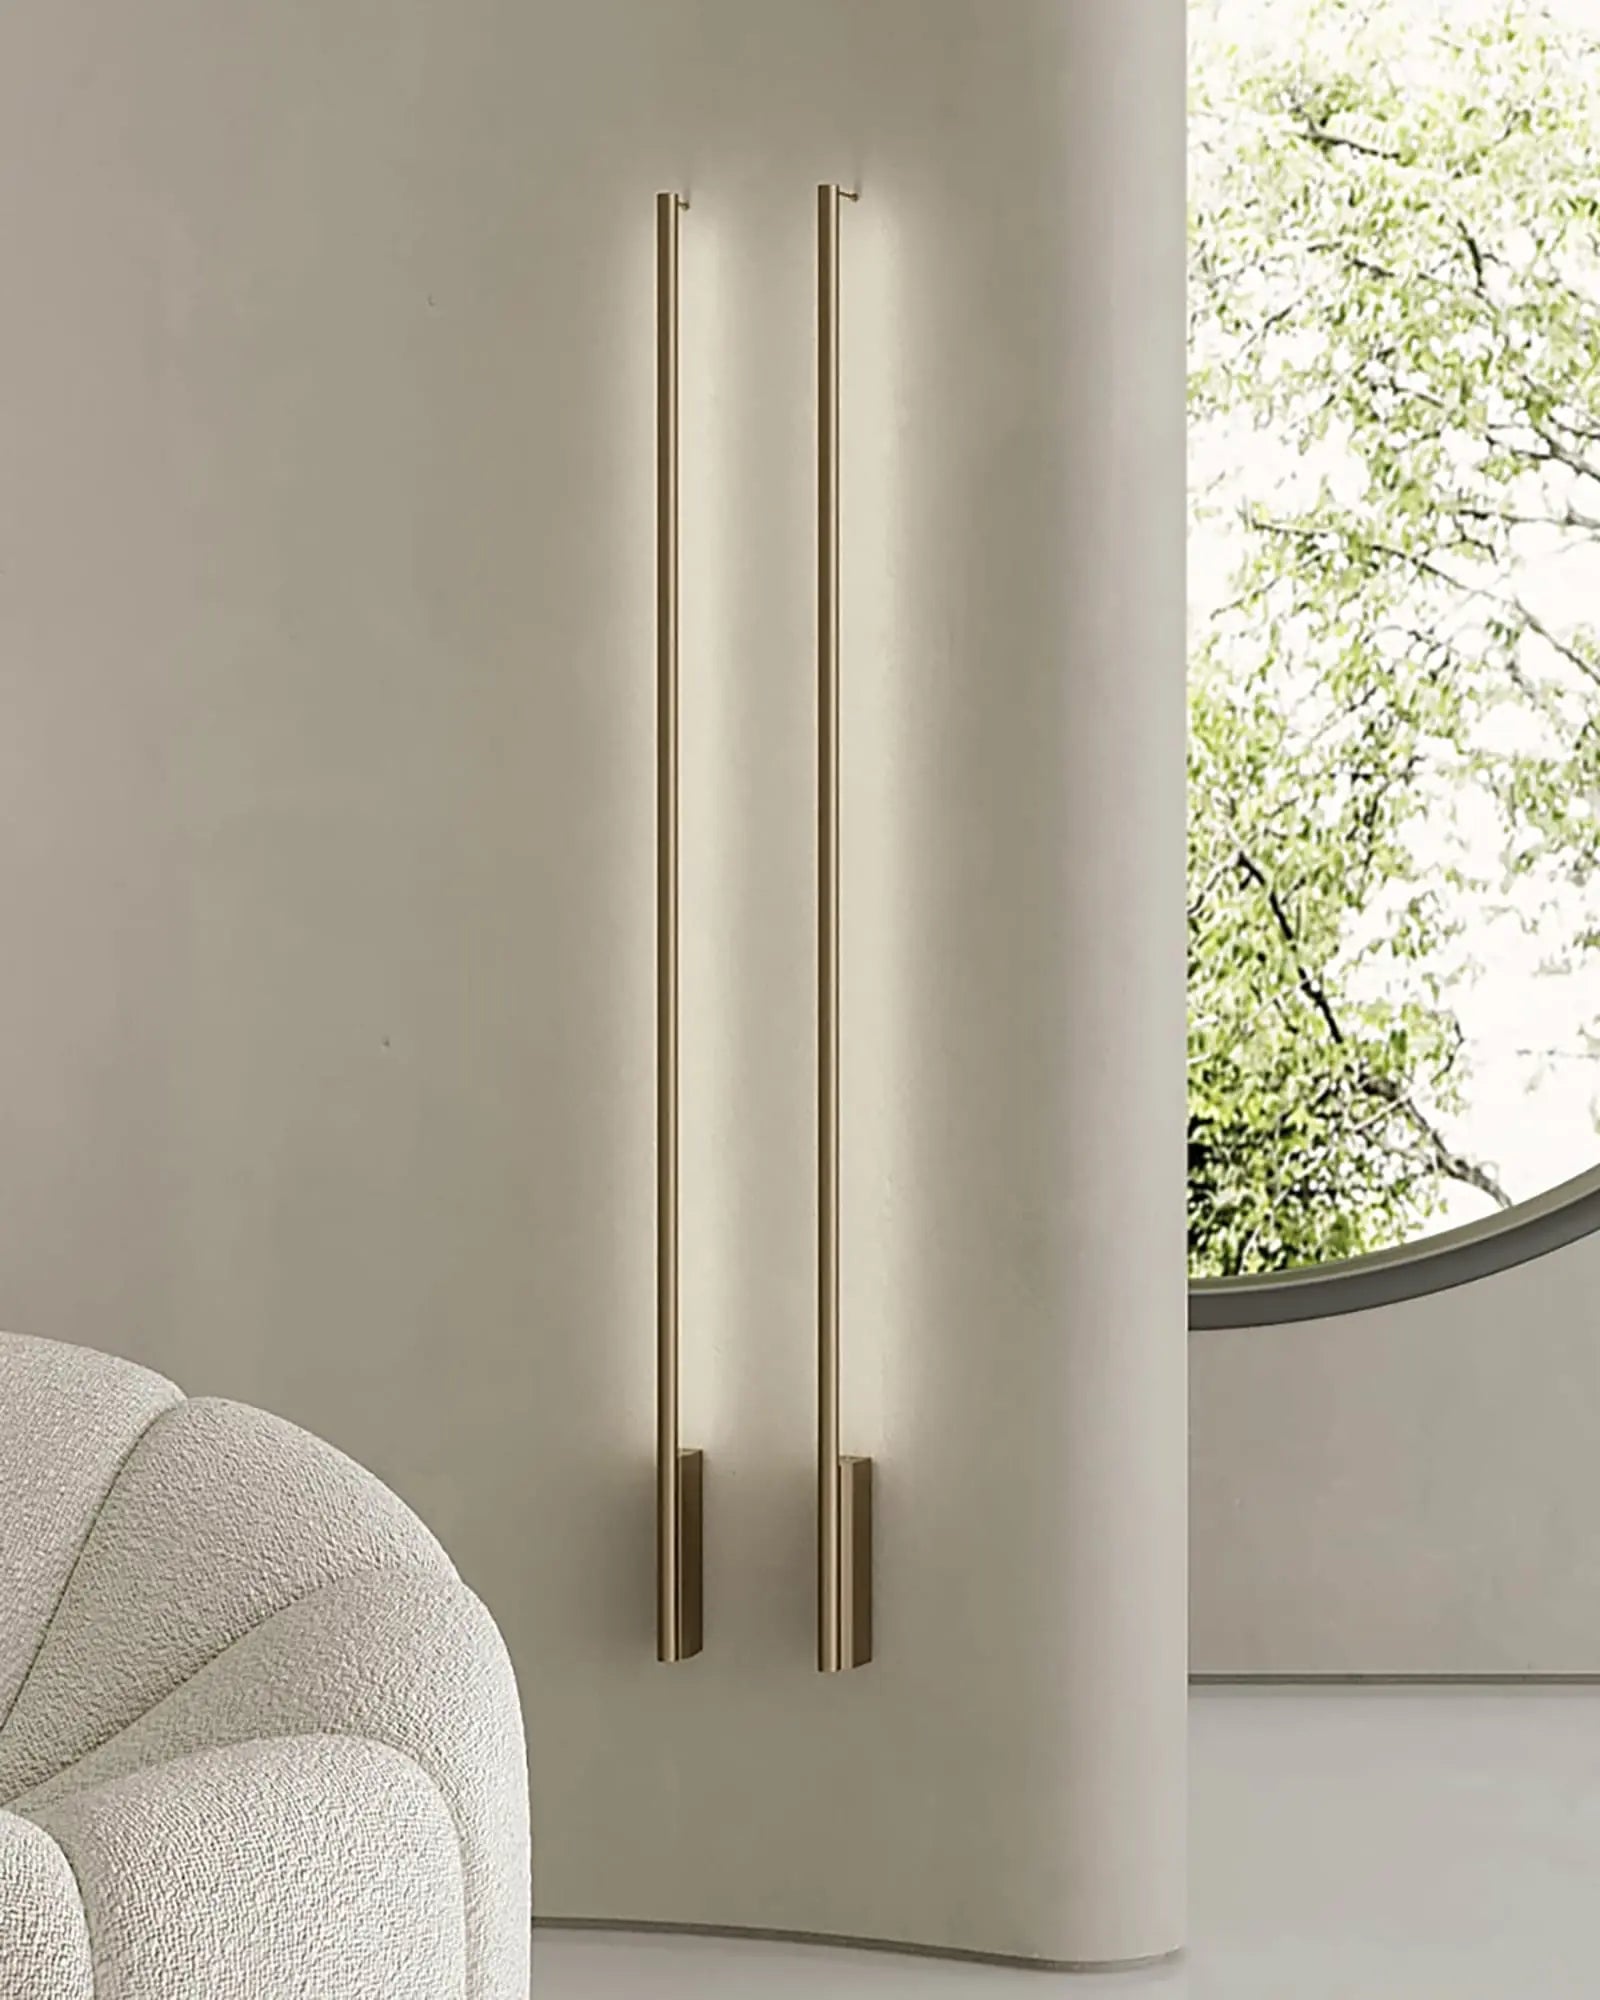 Hilow Line Wall Light in a living area next to a sofa